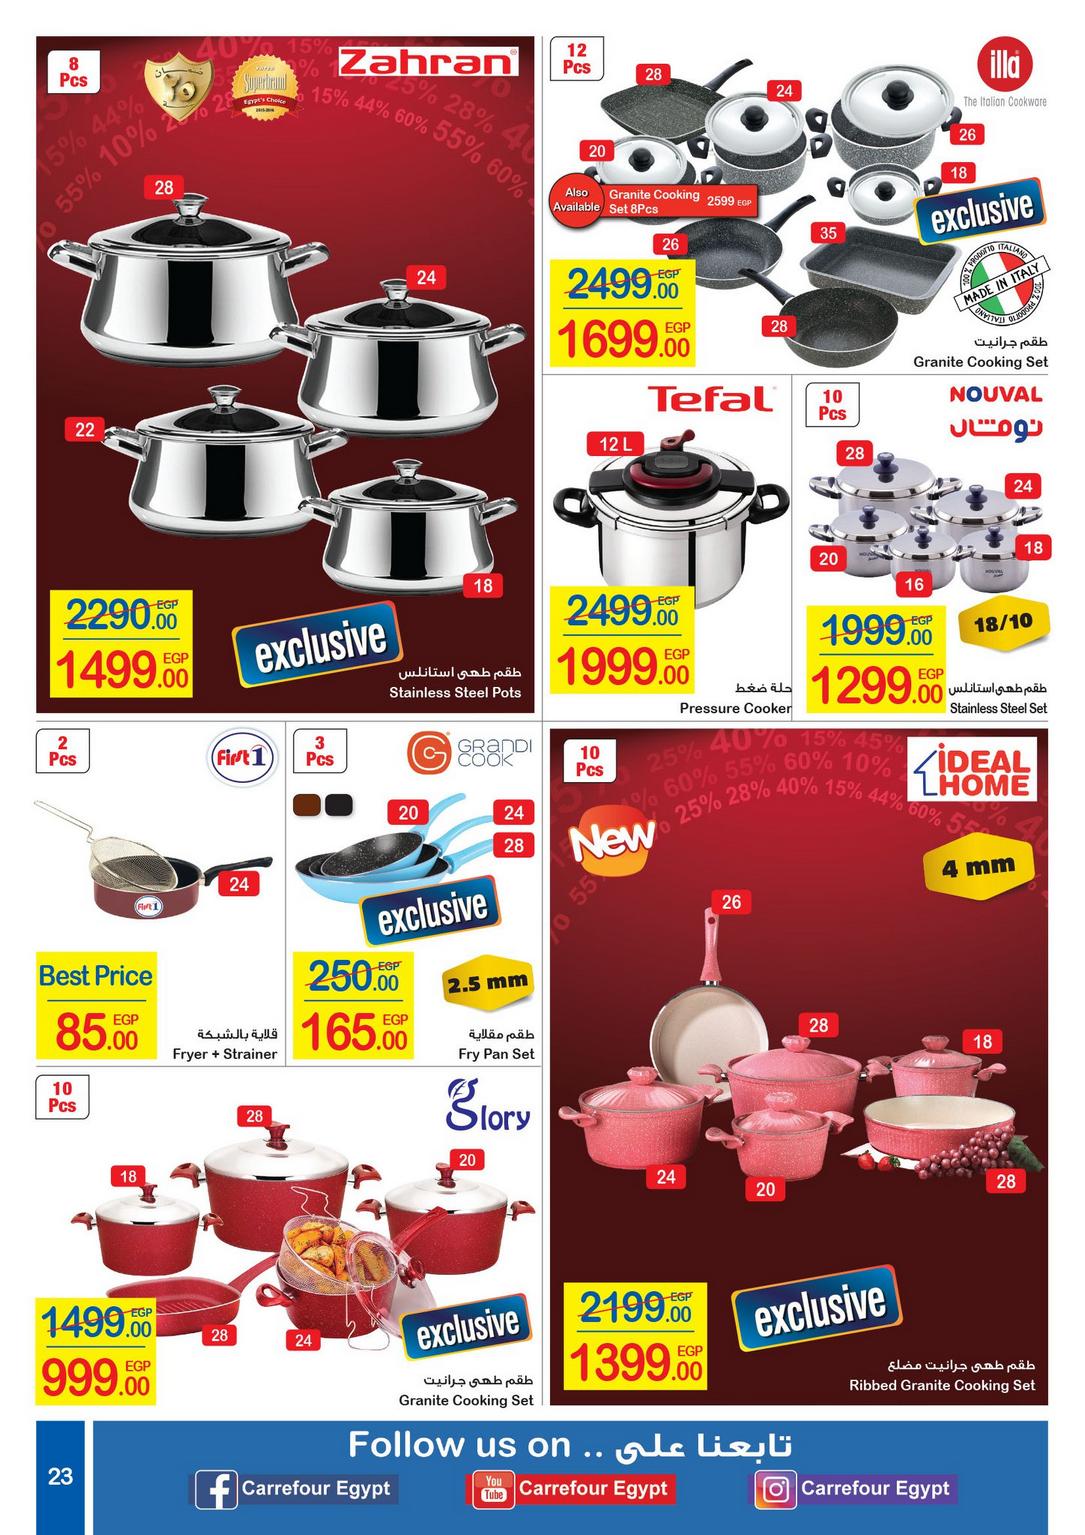 Carrefour Deals from 1/1 till 14/1 | Carrefour Egypt 24